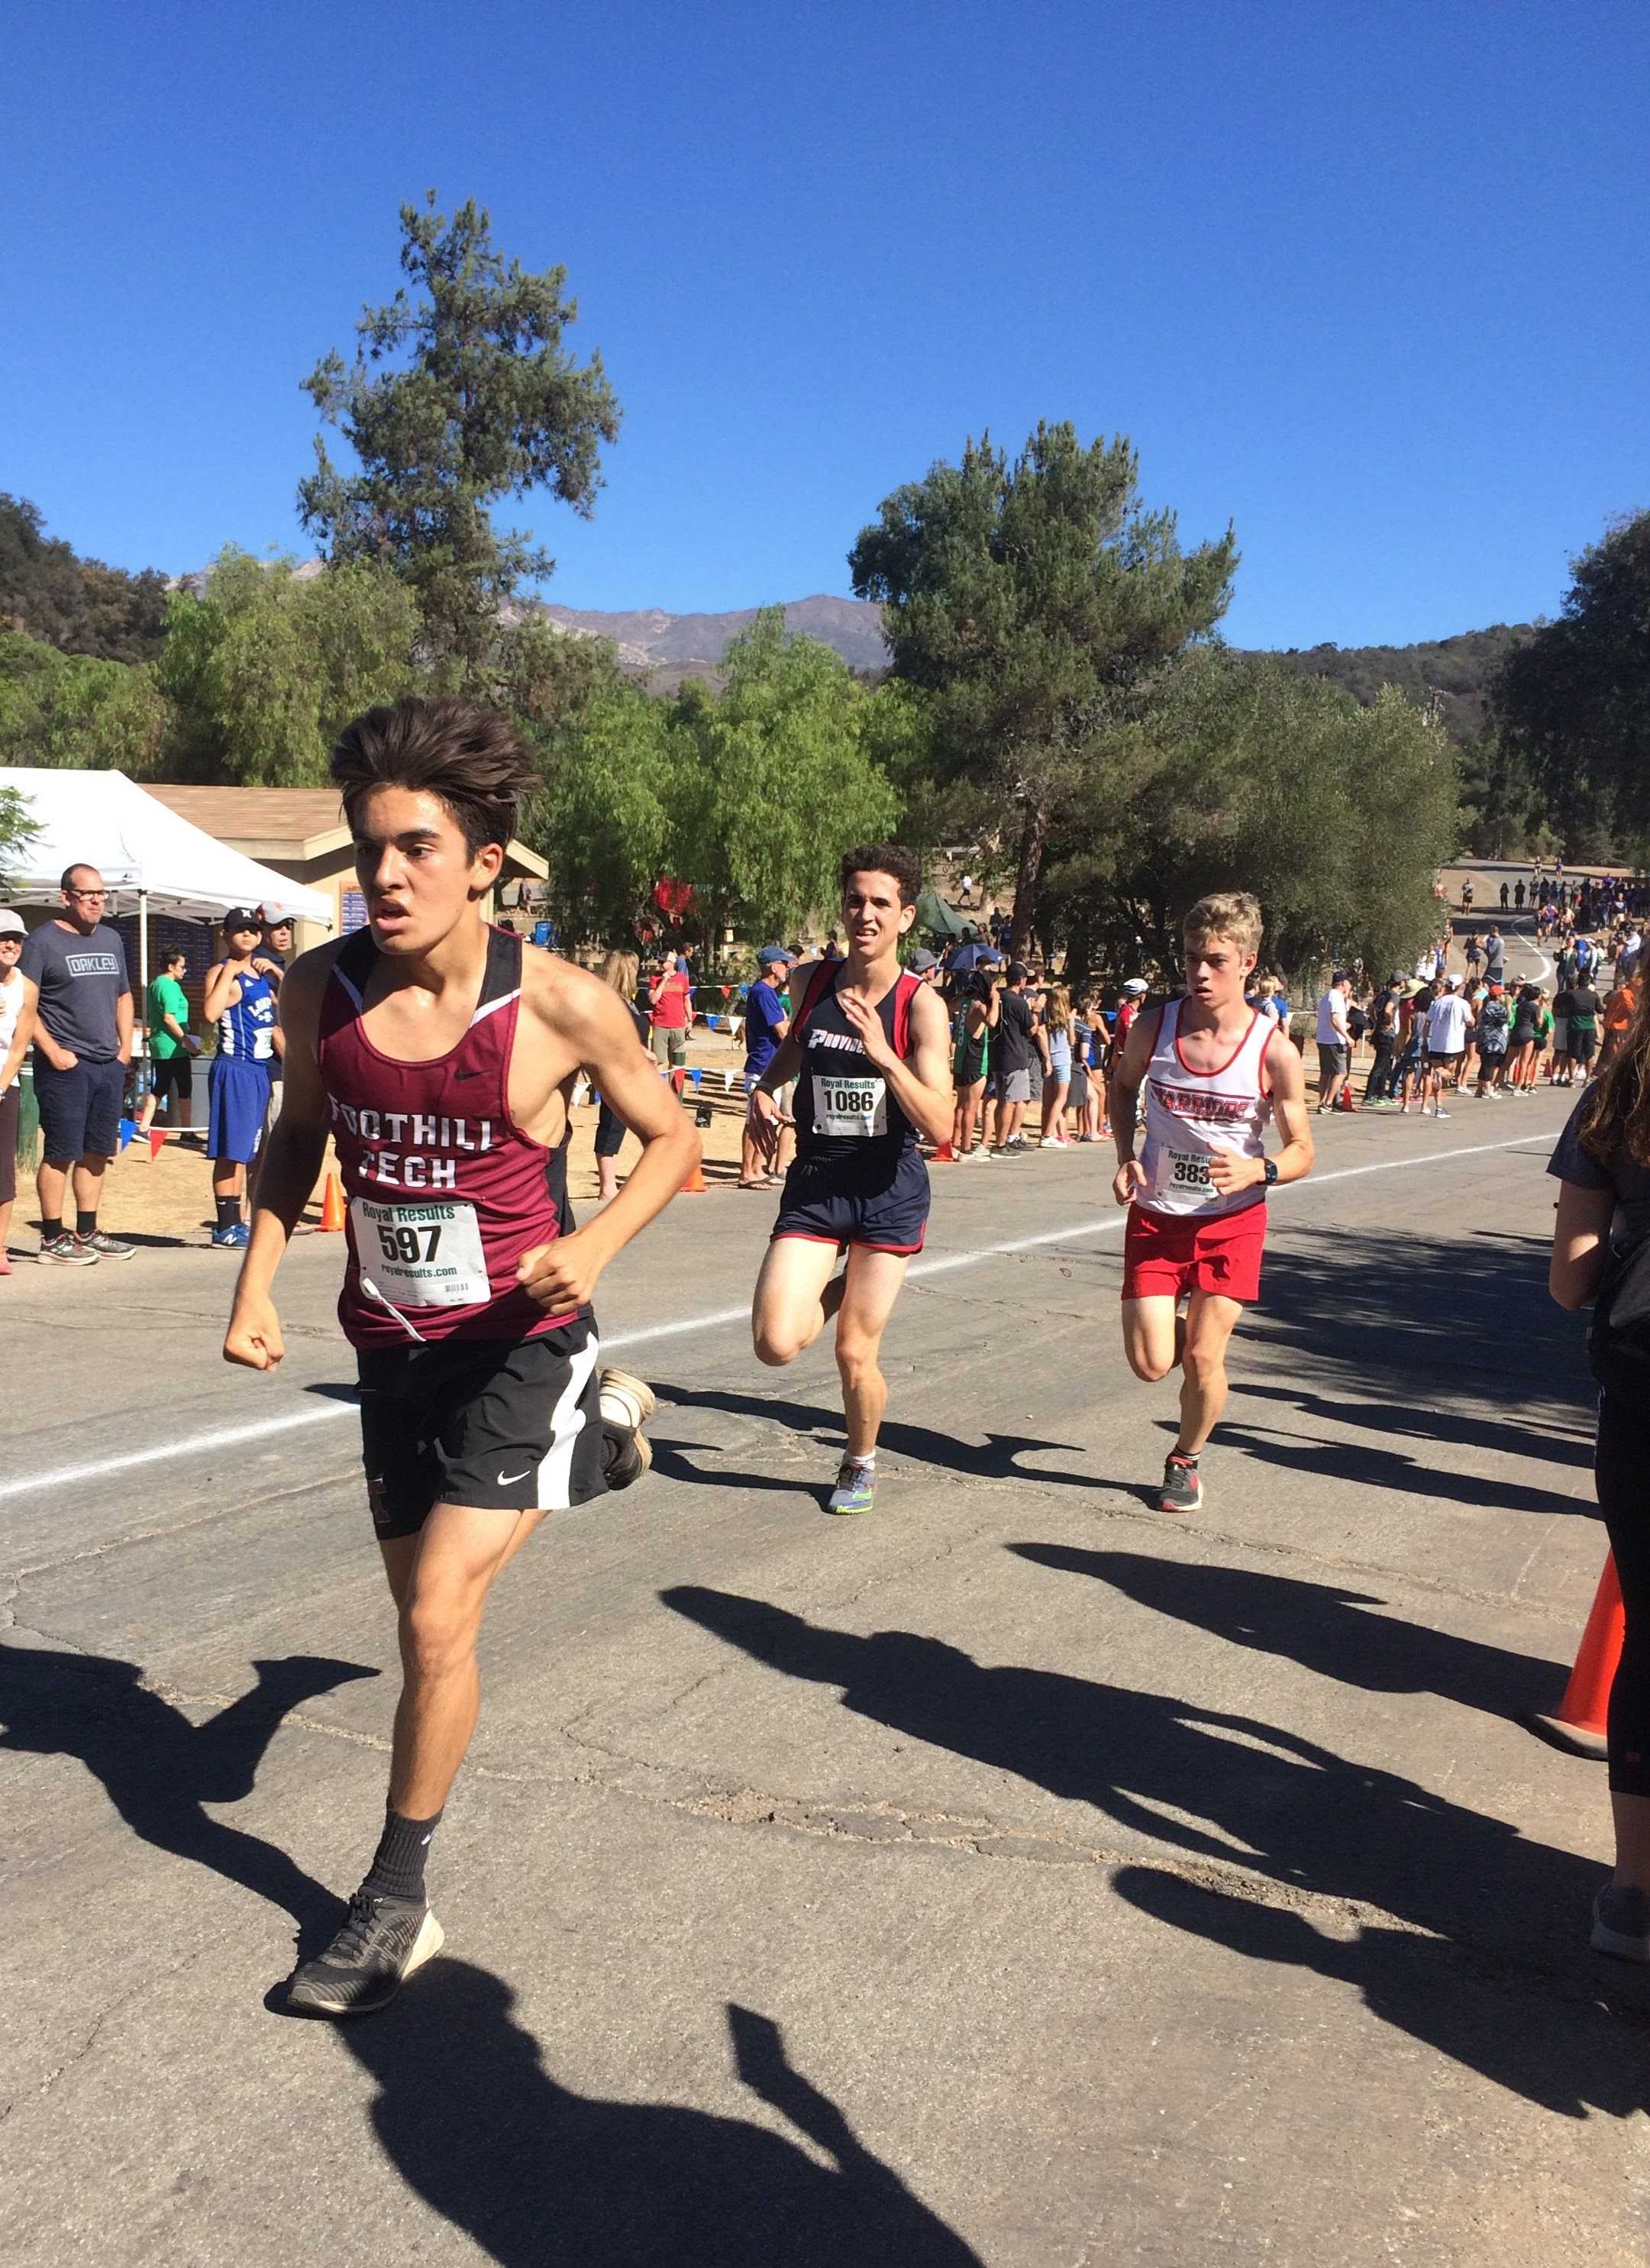 Josh Villasenor '21 pushing ahead of his competitors. Credit: Dylan Mullaney / The Foothill Dragon Press